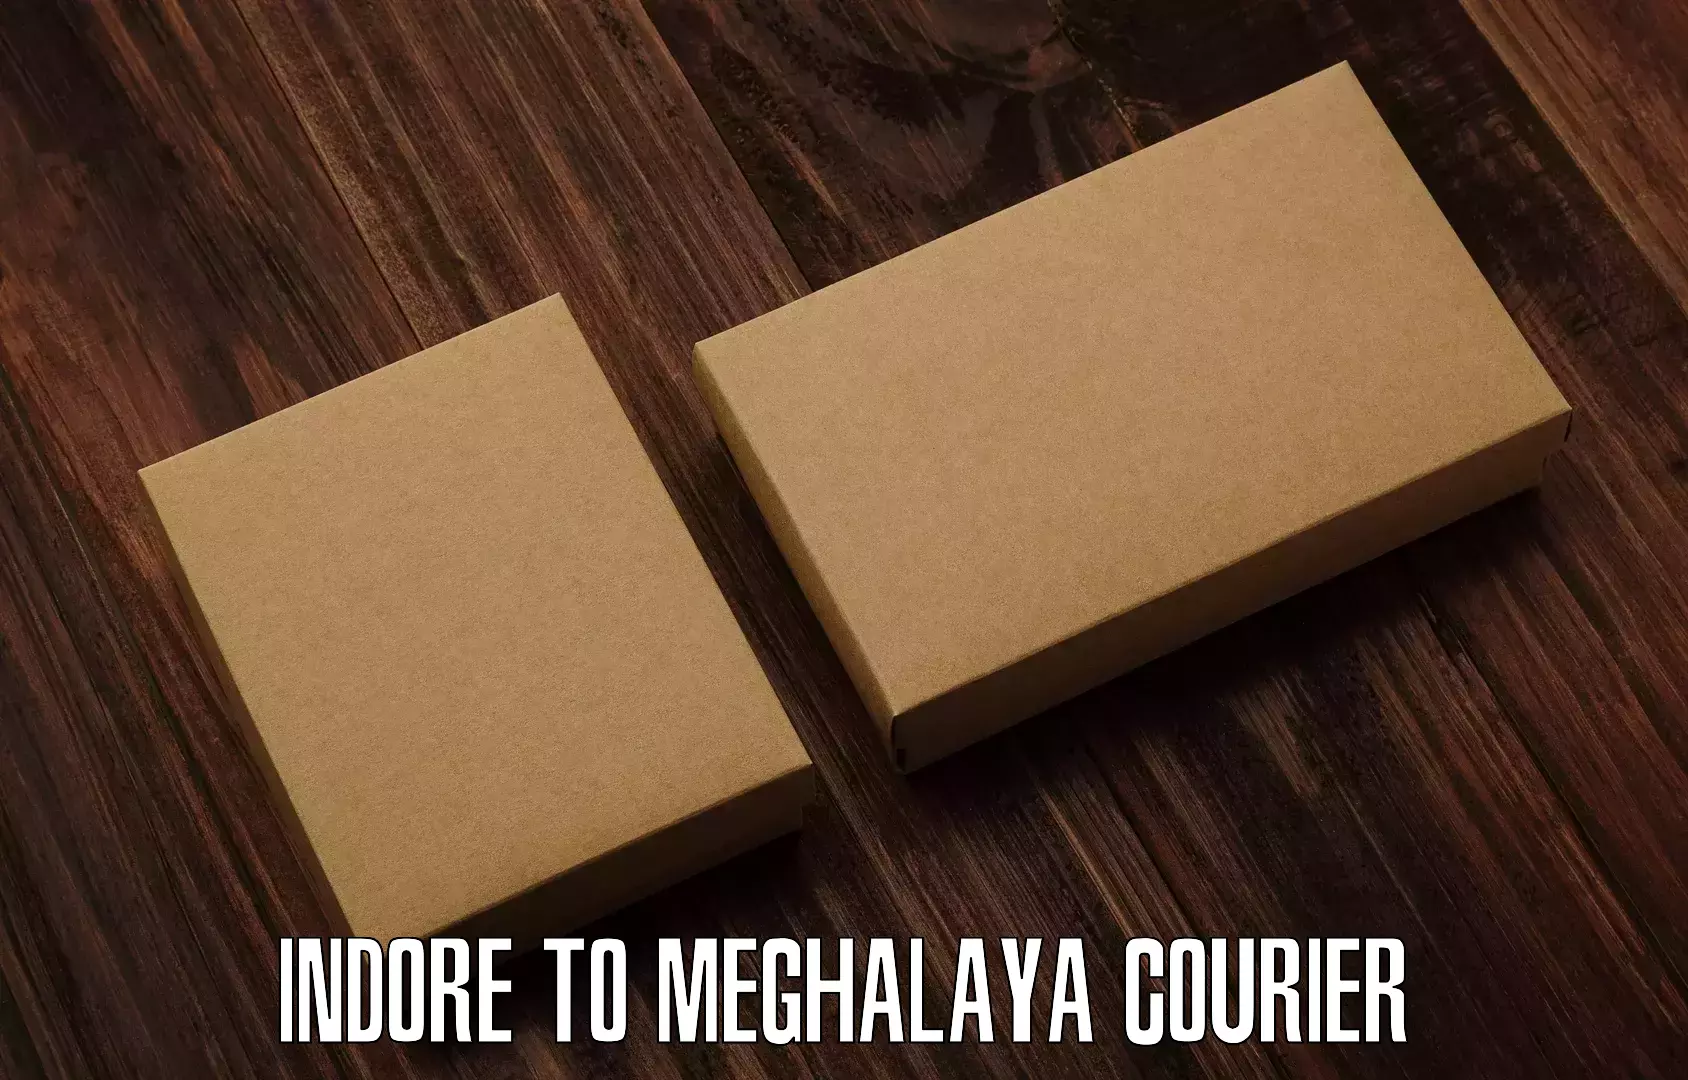 24-hour courier service Indore to Meghalaya